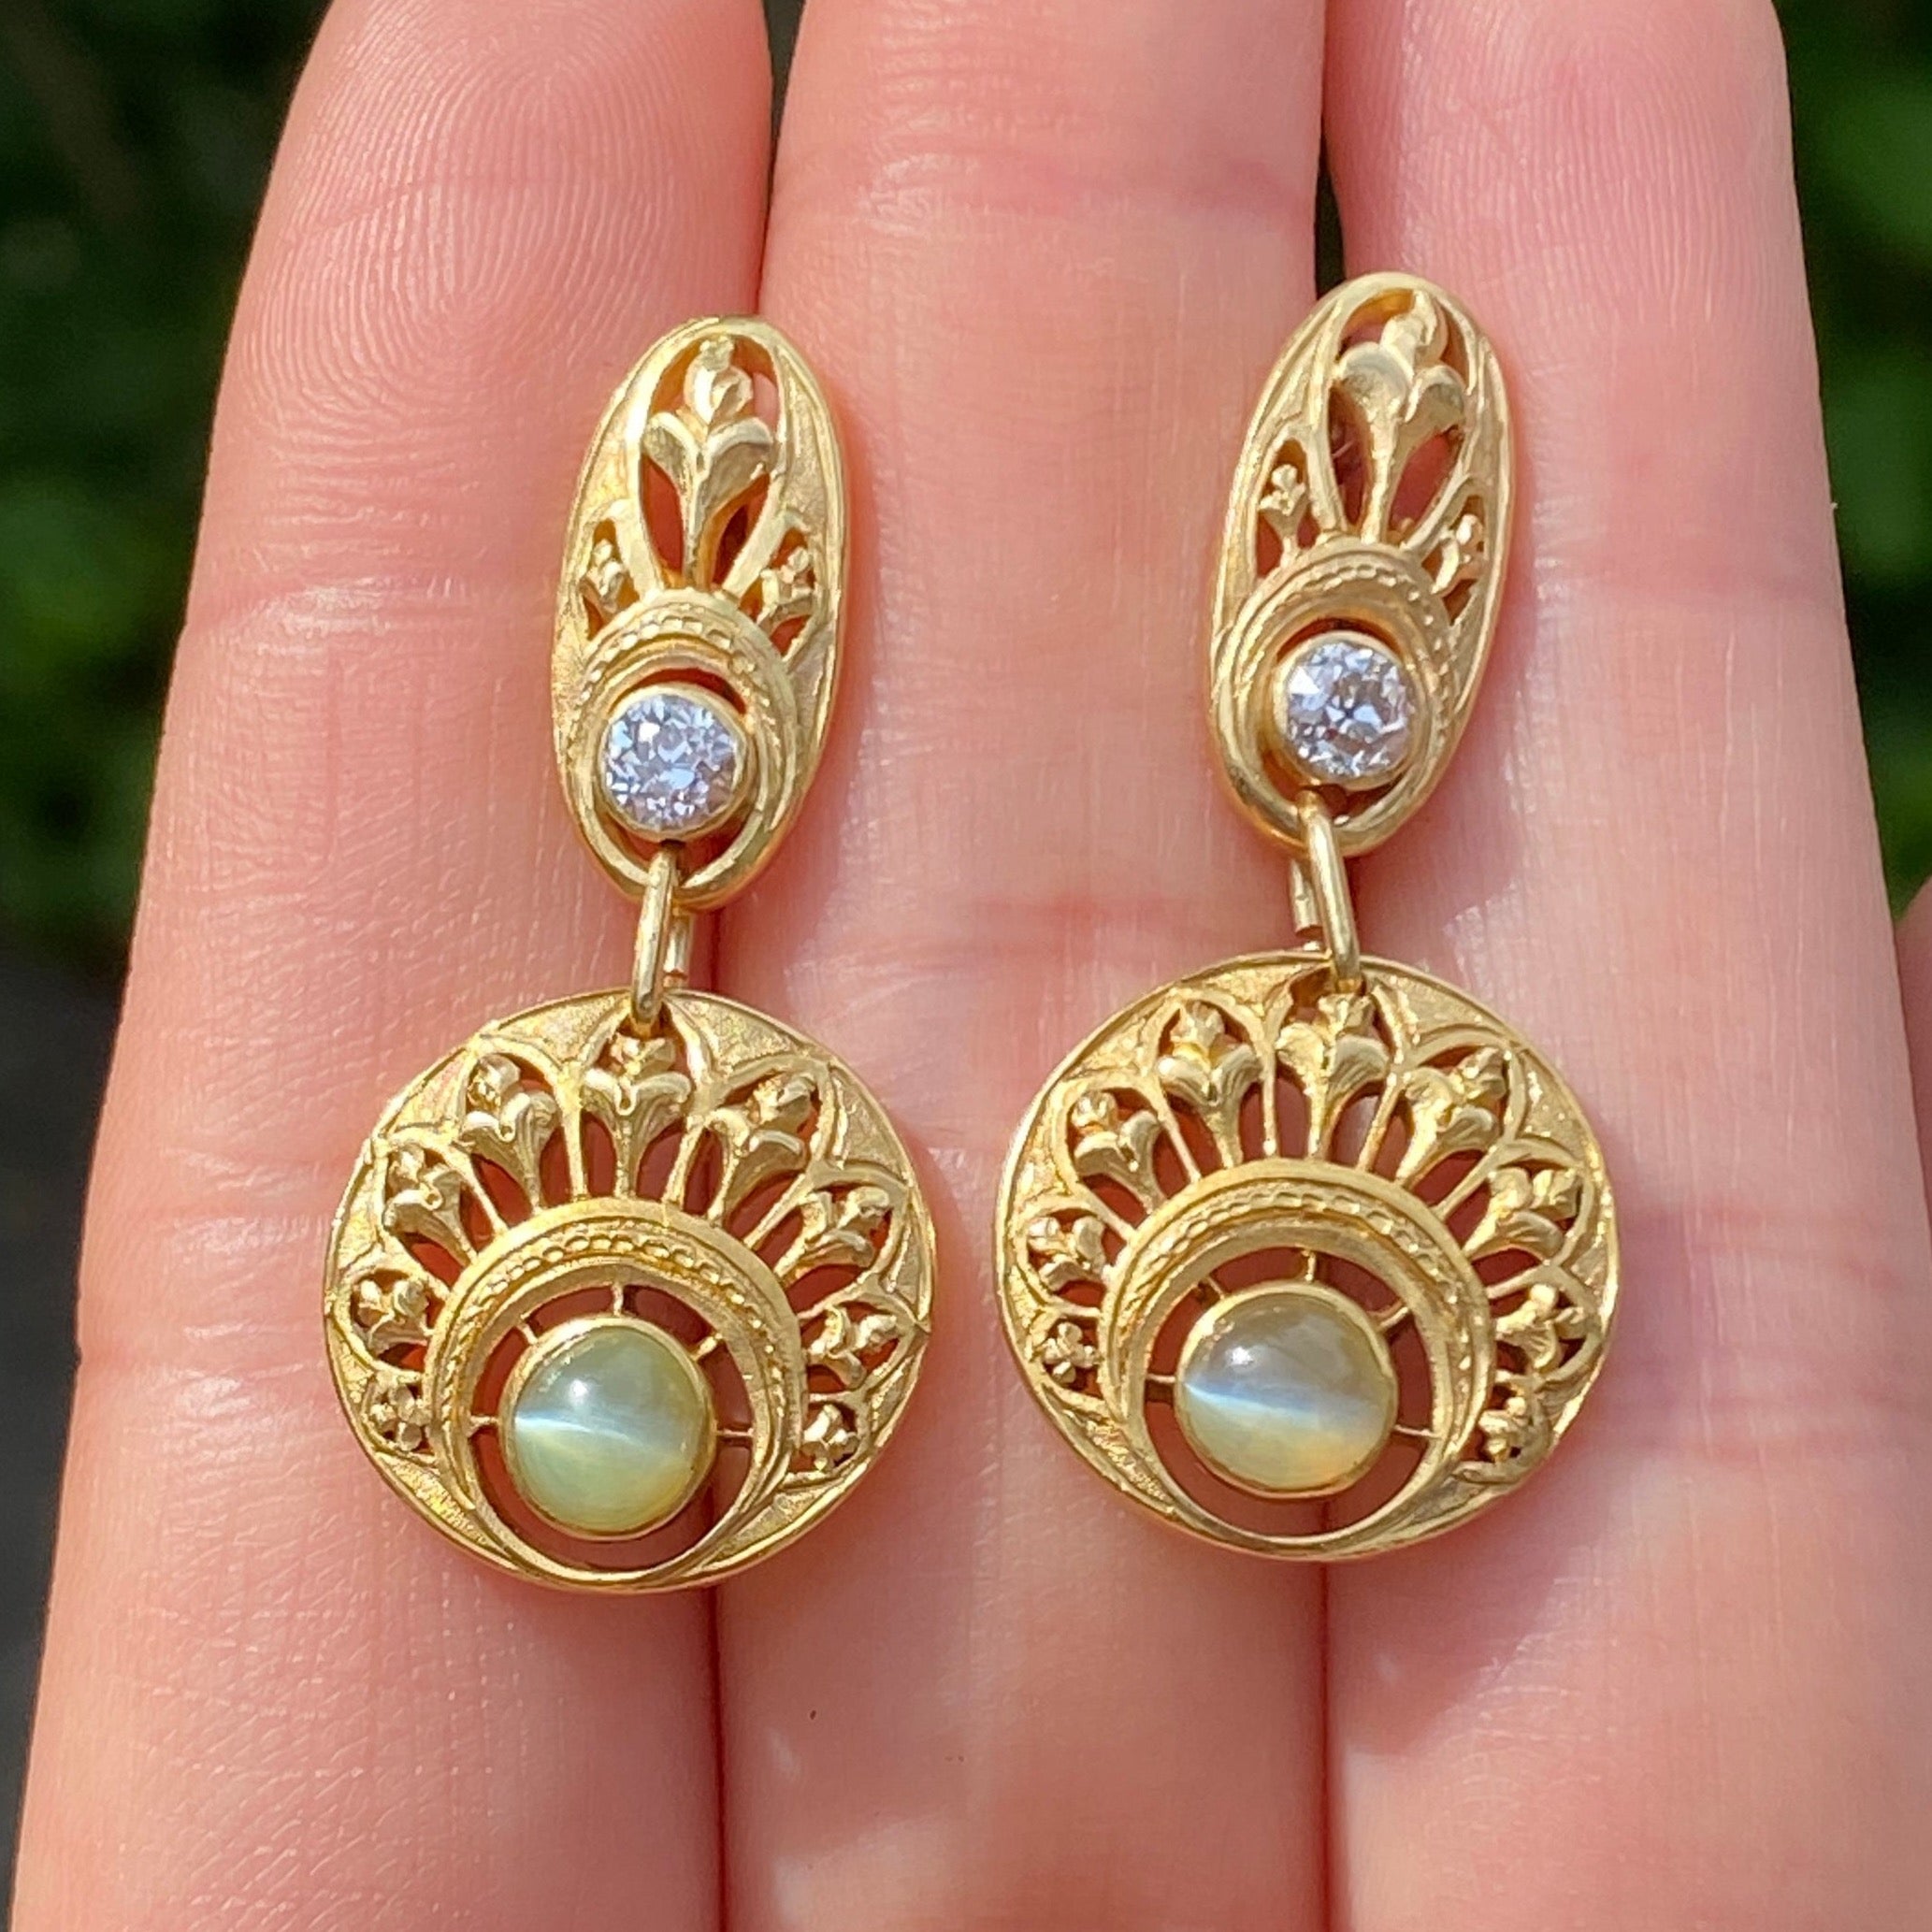 Exquisite Gold Earring Designs For Her | South Indian Jewels